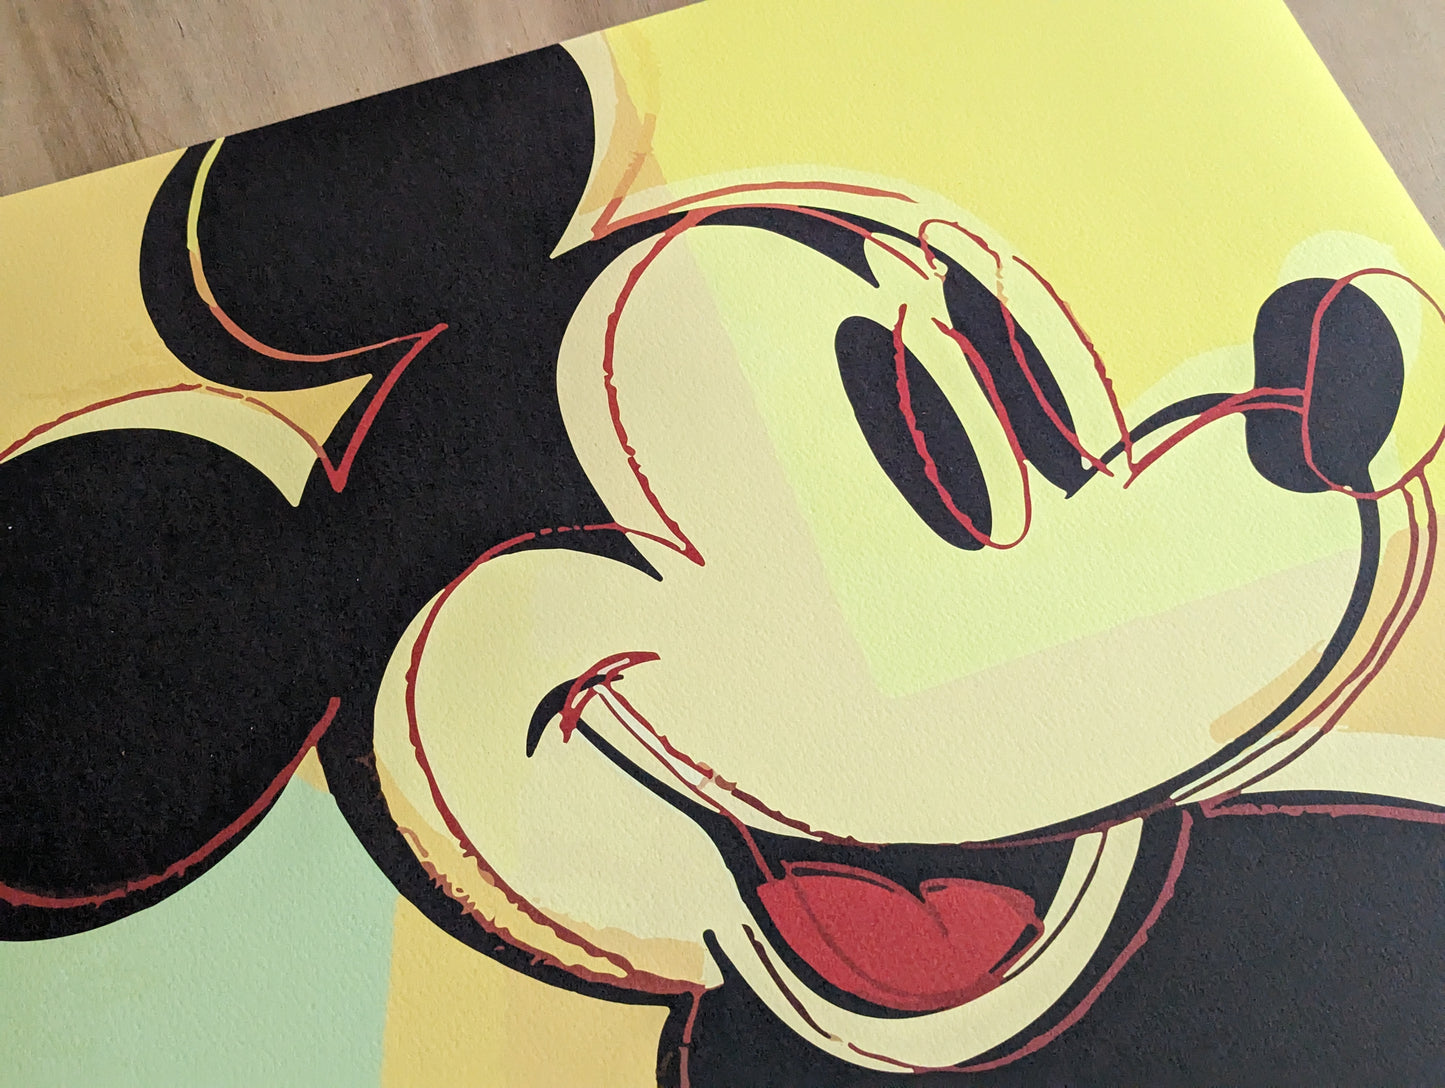 Andy Warhol - Mickey Mouse (1980)